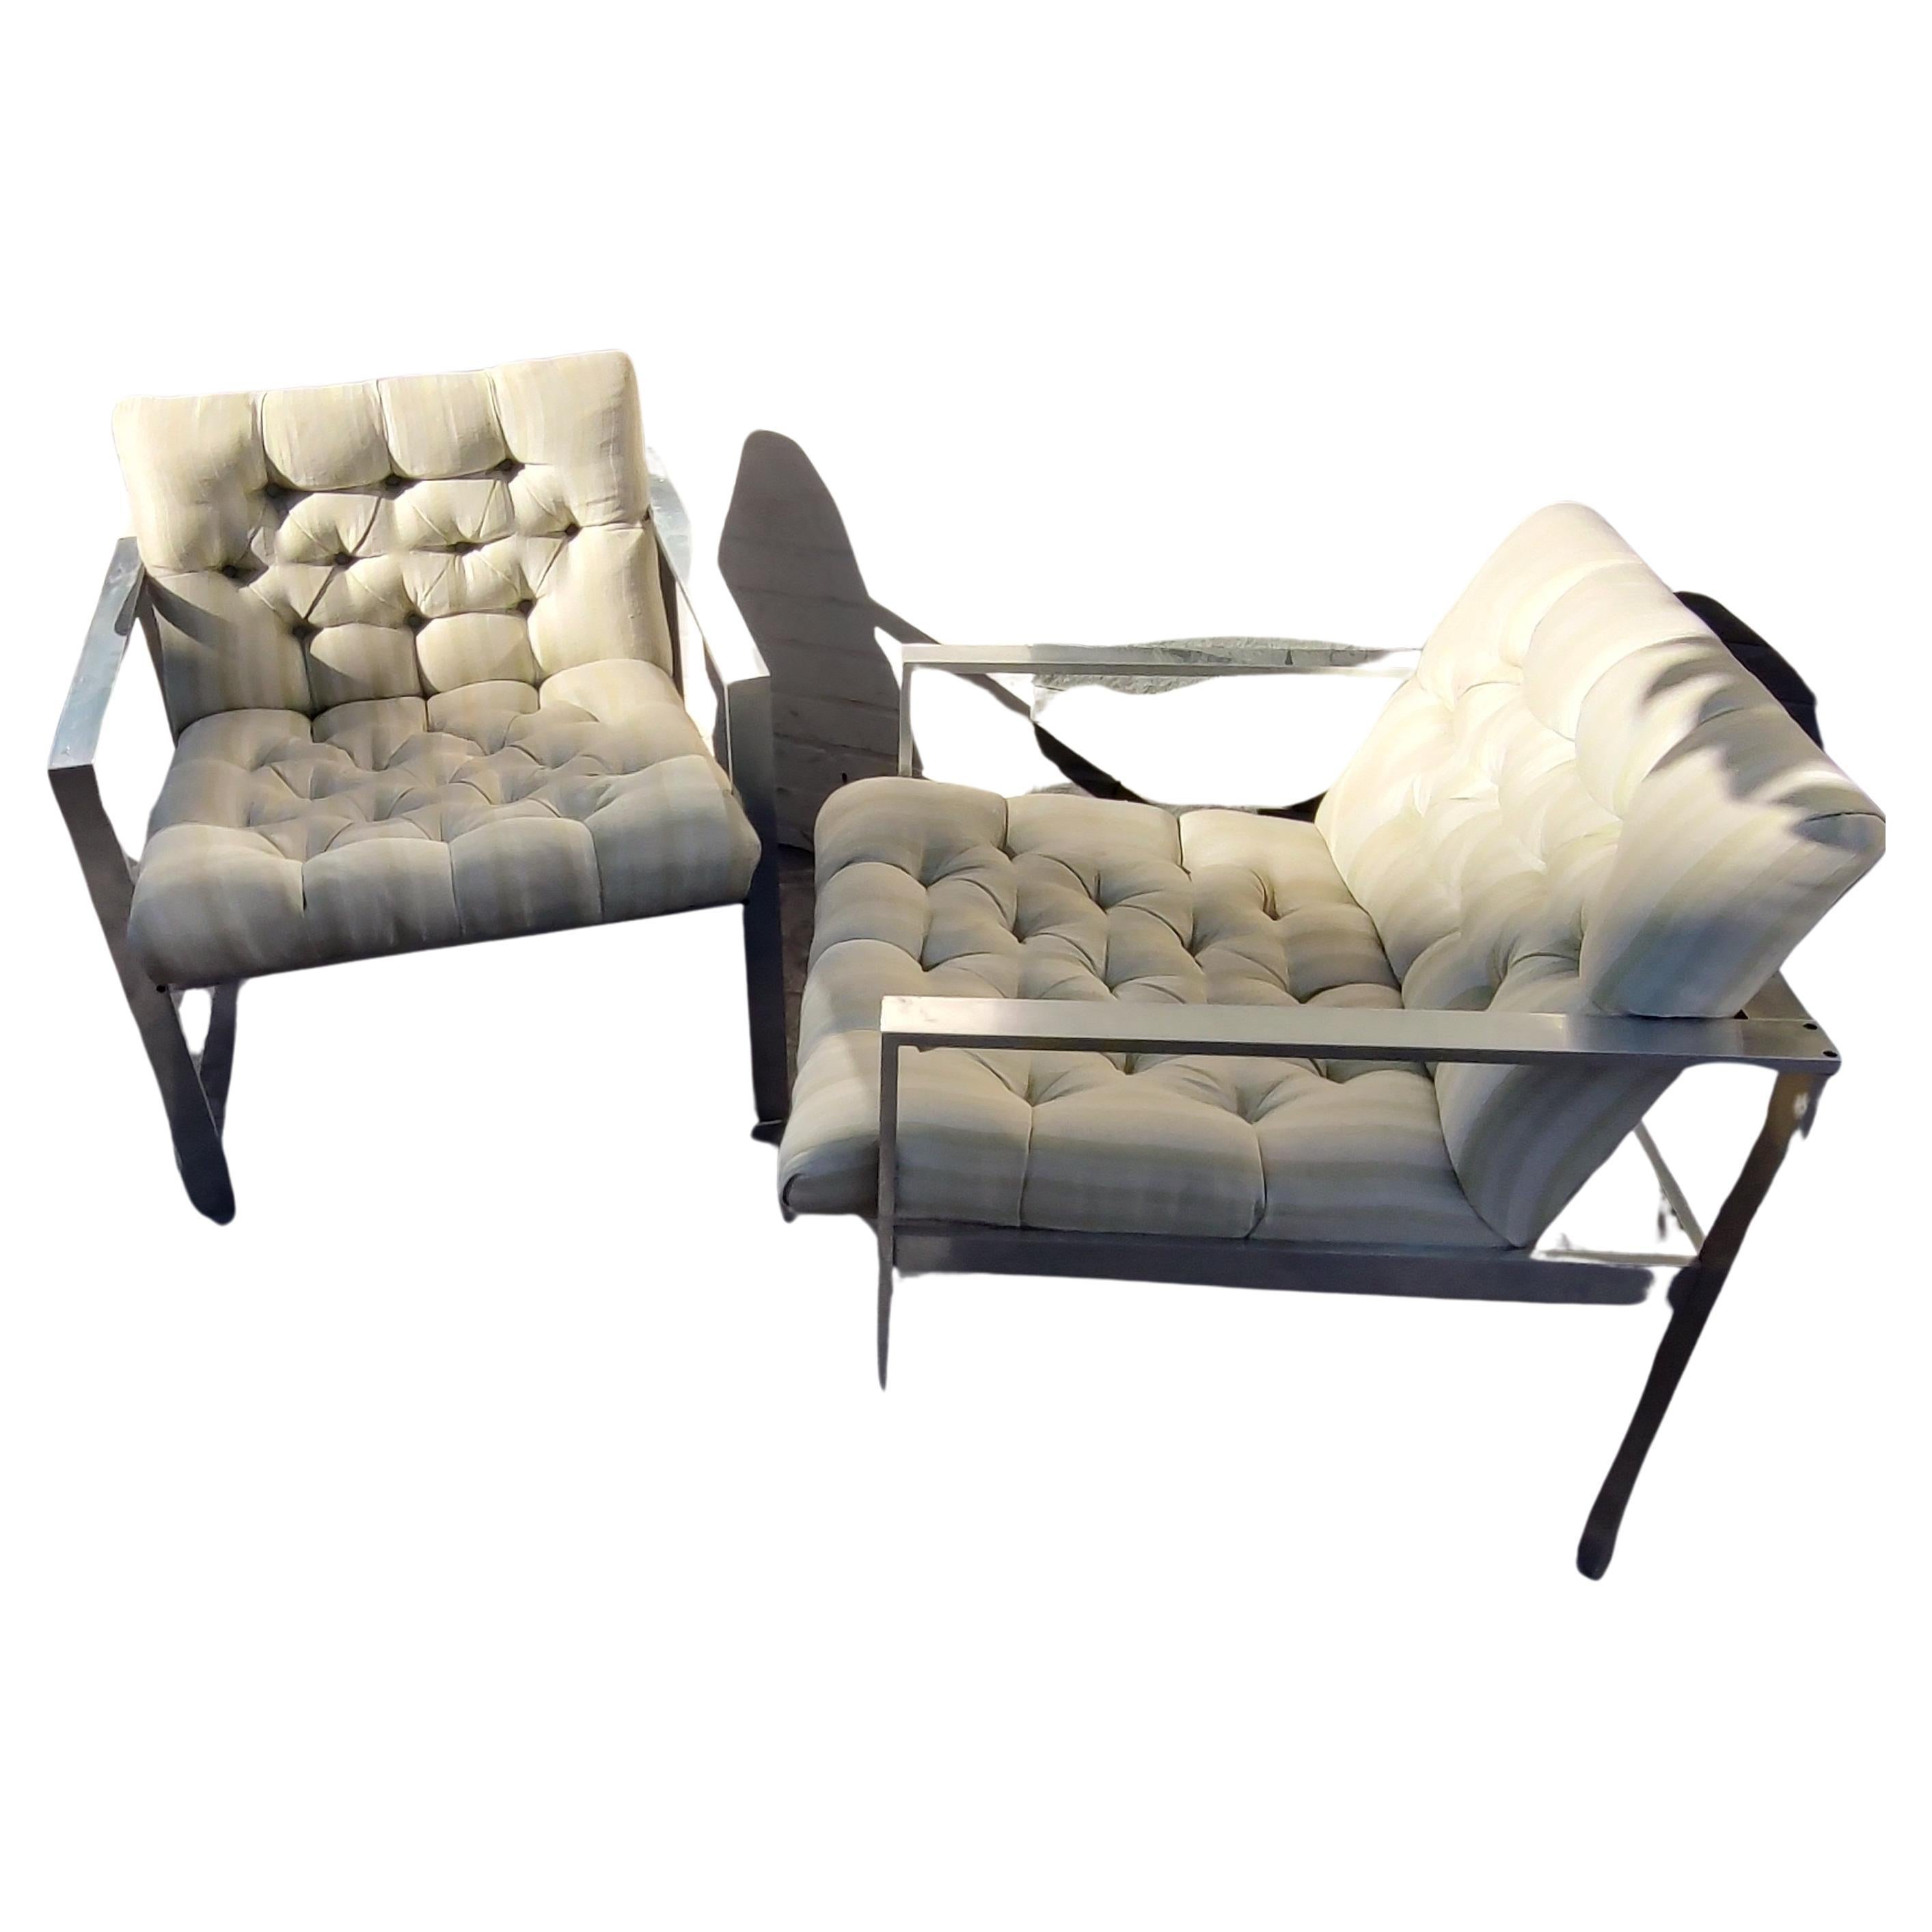 Simple and elegant pair of Mid-Century Modern Sculptural tufted lounge chairs by Harvey Probber. Alcoa aluminum is the main material making up the beautiful frames. Button tufted with a nice striped material. In excellent vintage condition, minor